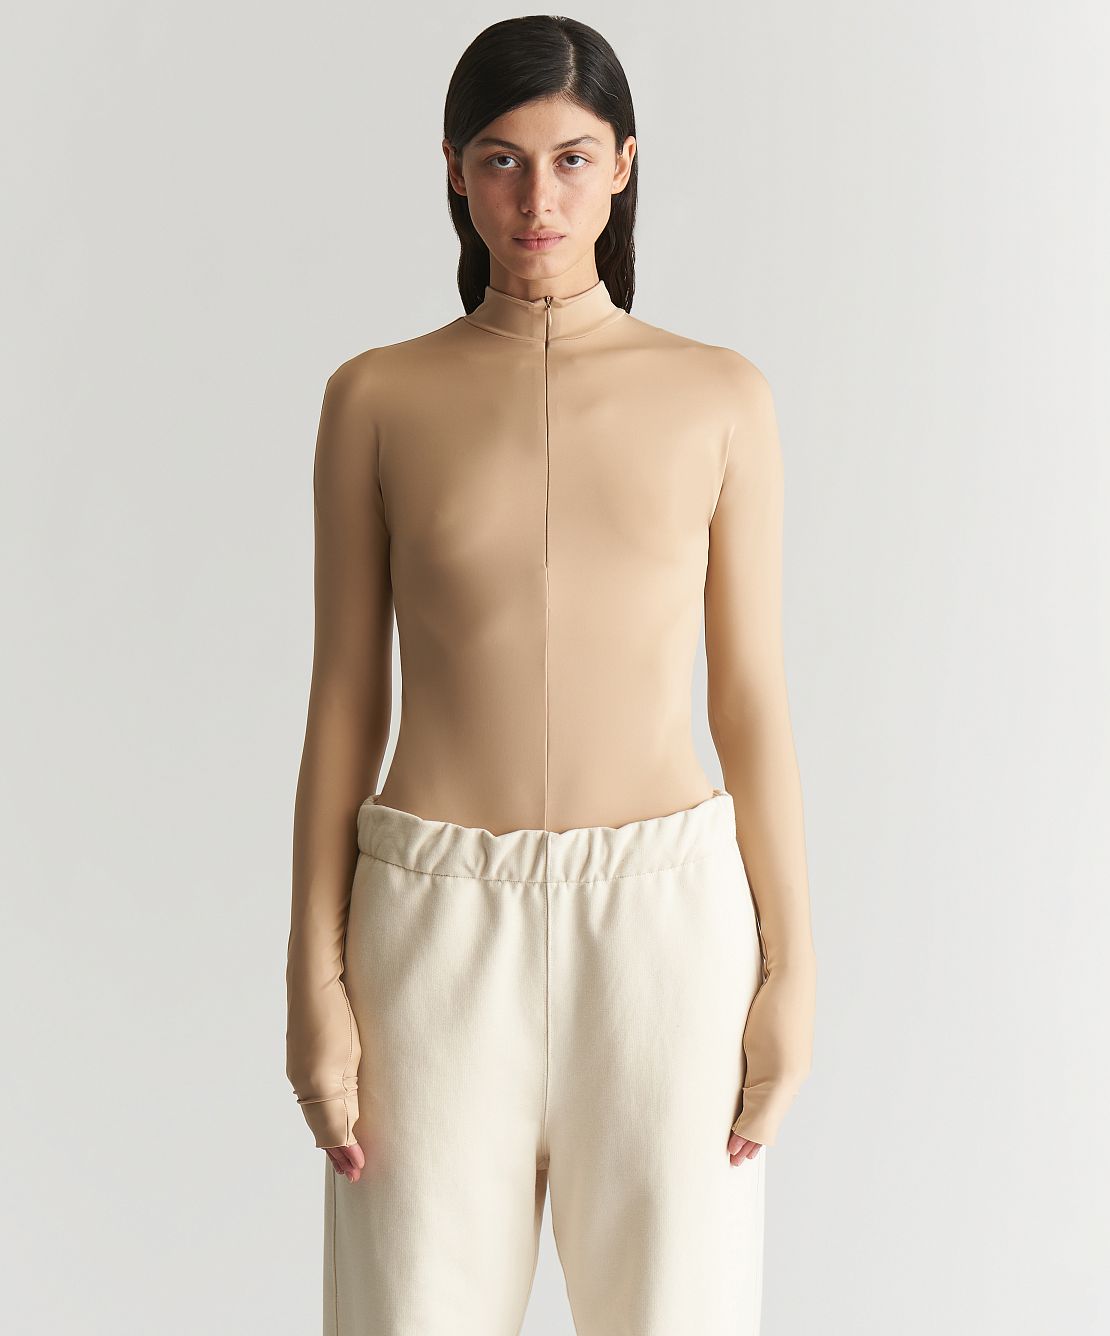 Zip-up bodysuit, knitted collection